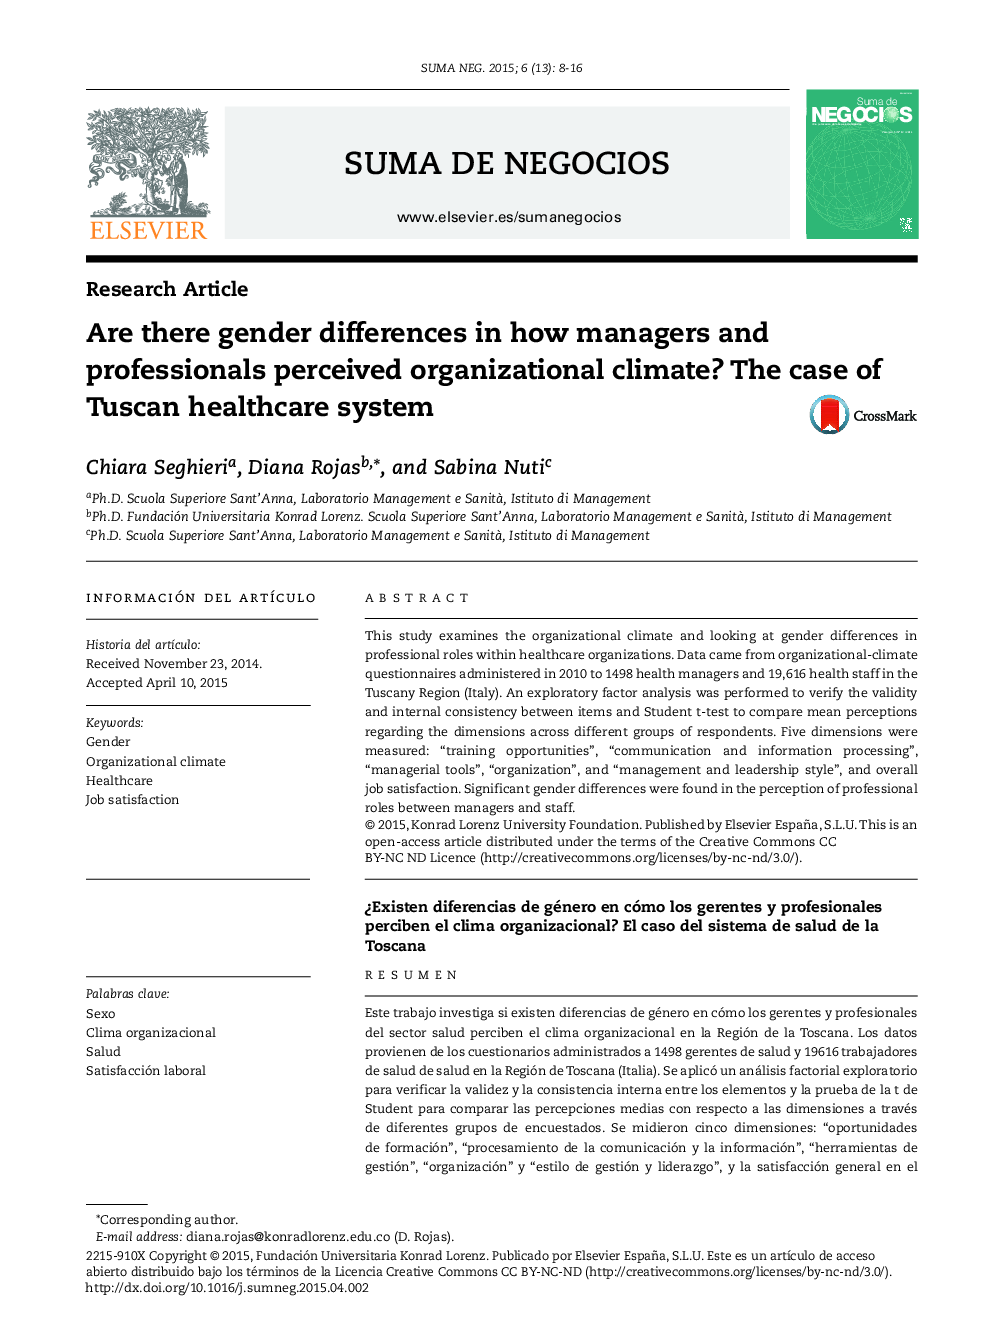 Are there gender differences in how managers and professionals perceived organizational climate? The case of Tuscan healthcare system